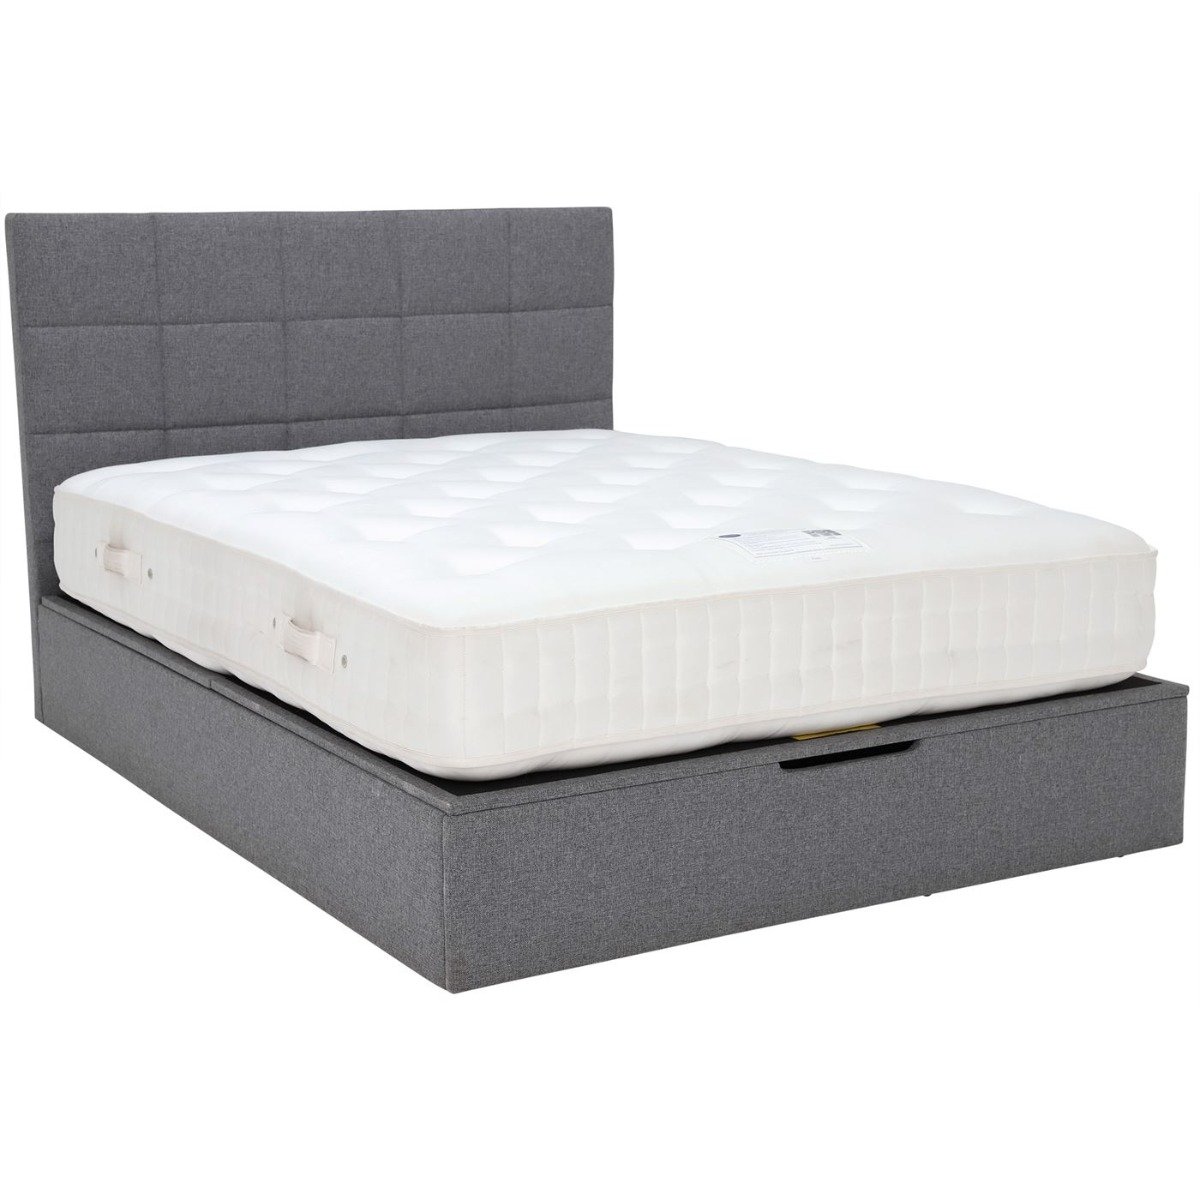 Souter Ottoman Bed Frame 150Cm, Grey Fabric | King | Barker & Stonehouse